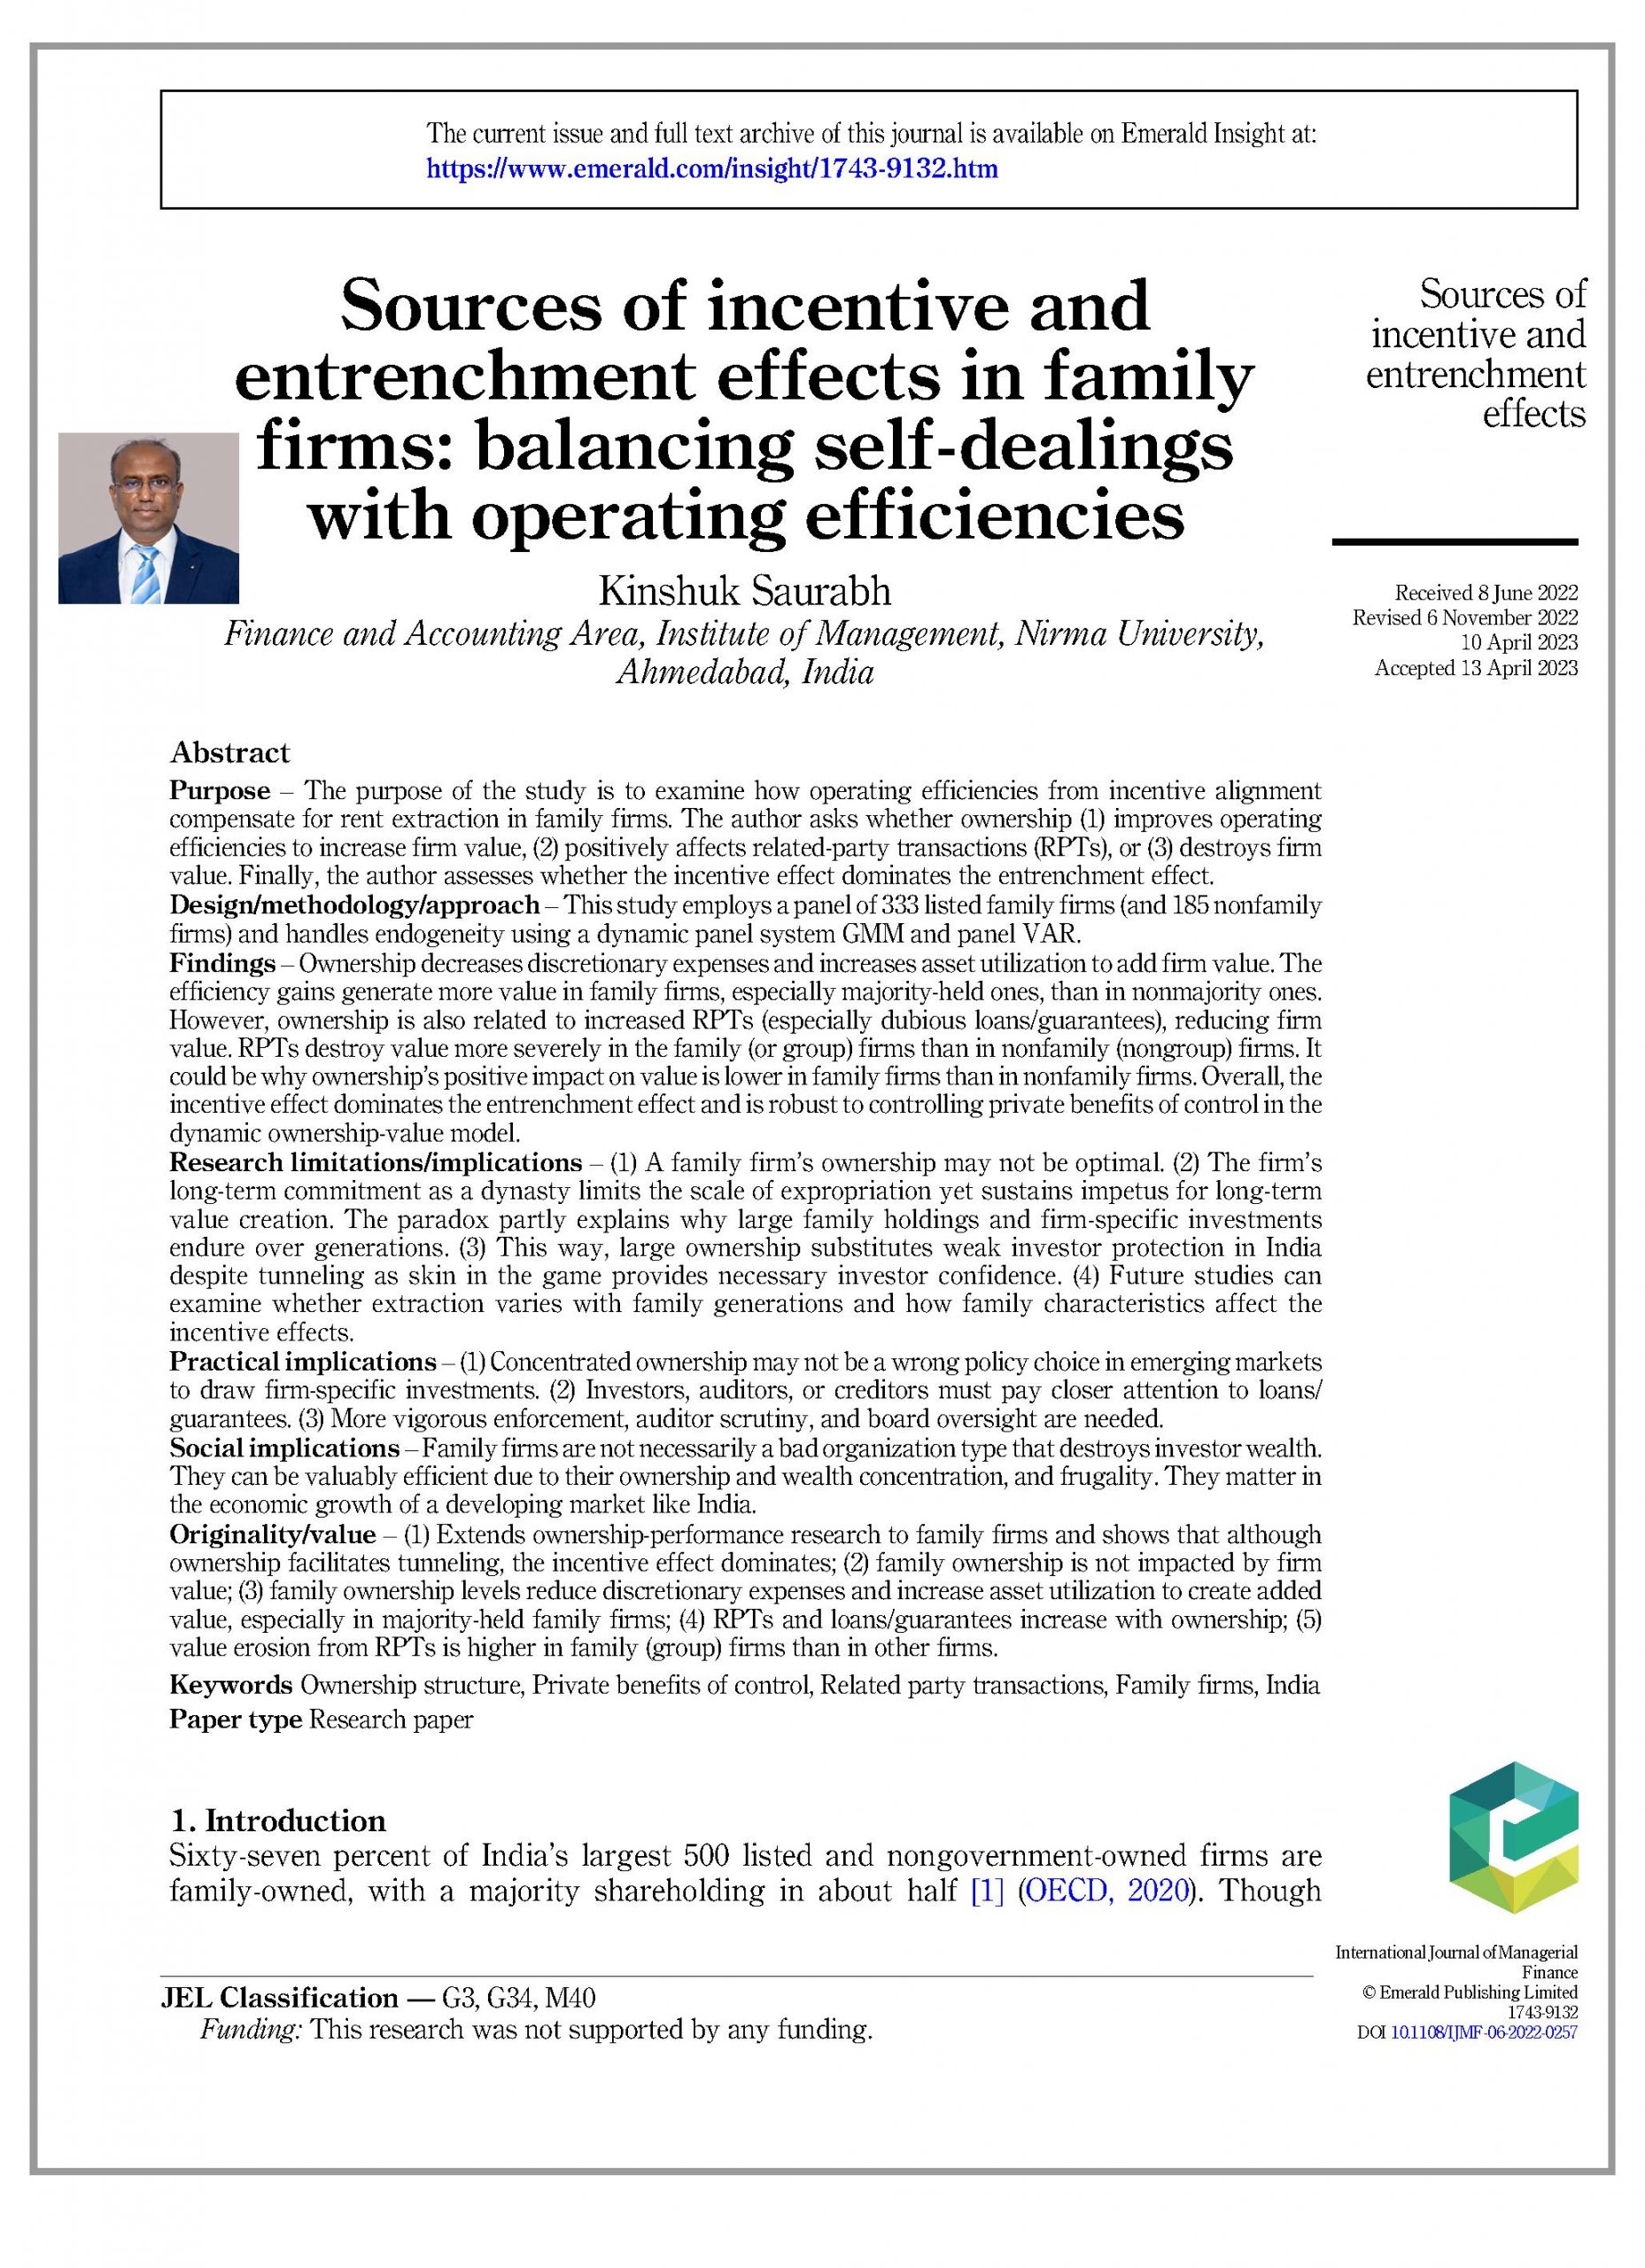 Sources of Incentive and entrenchment effects in family firms: balancing self-dealings with operating efficiencies